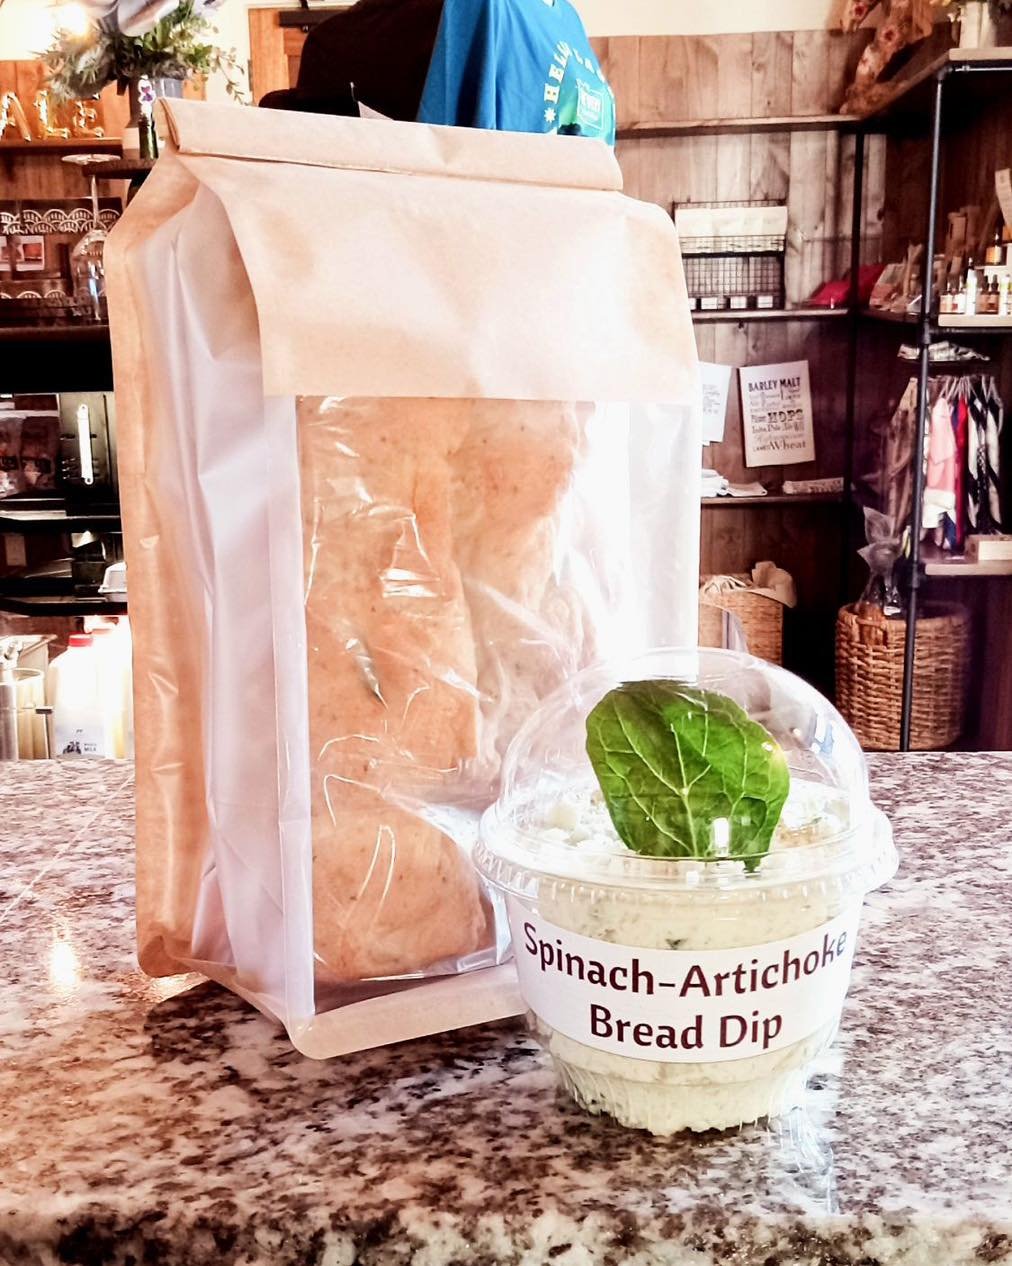 Now available in our farm store to go. Our house made table  bread and spinach artichoke dip. Come pick up some today

#thingstotryinwillcoxaz #relax #tirritofarms #TirritoFarm #tablebread